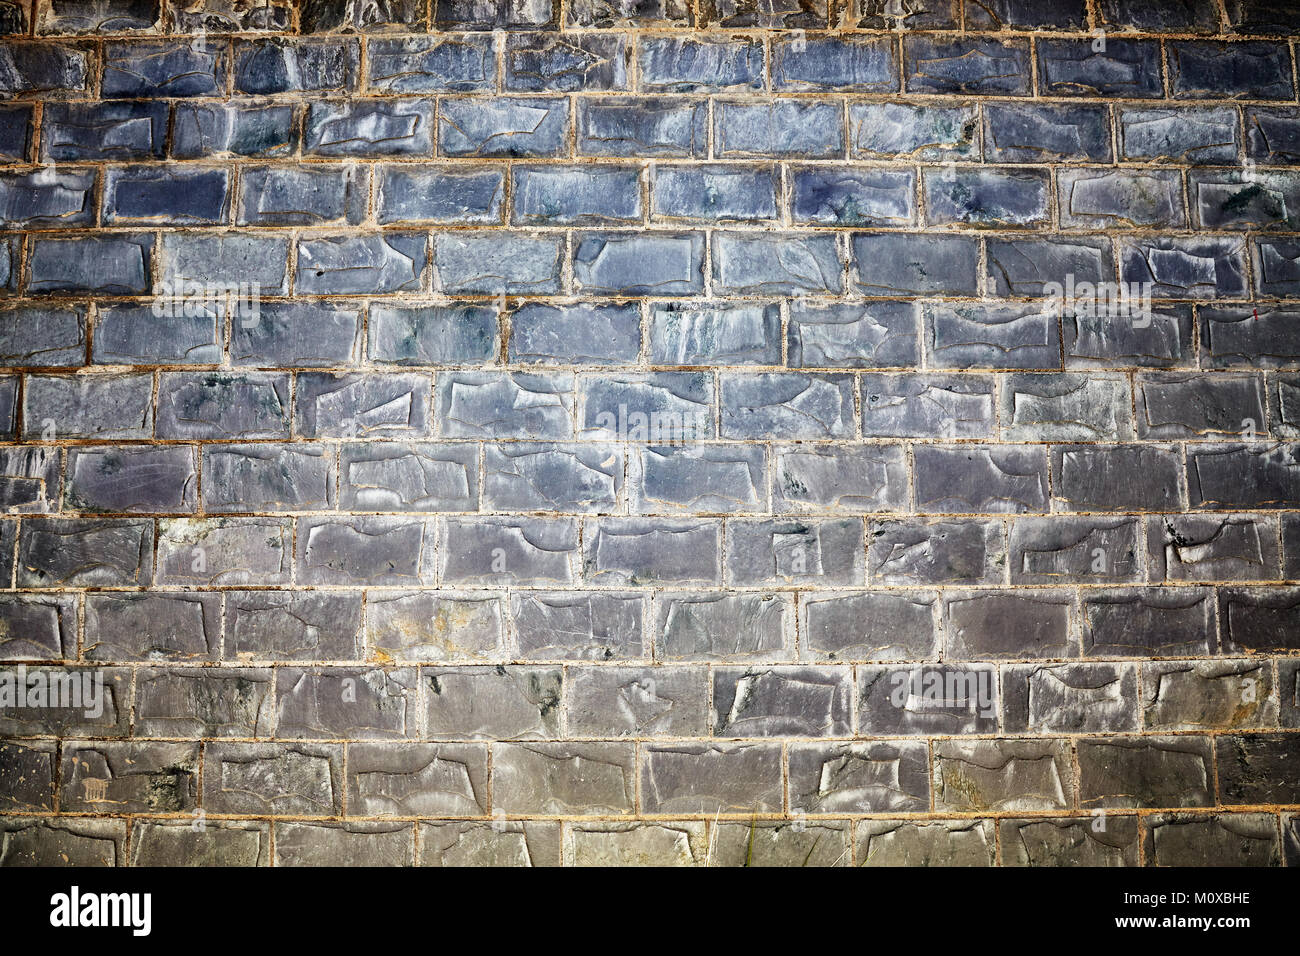 Old stained stone brick wall background or texture. Stock Photo